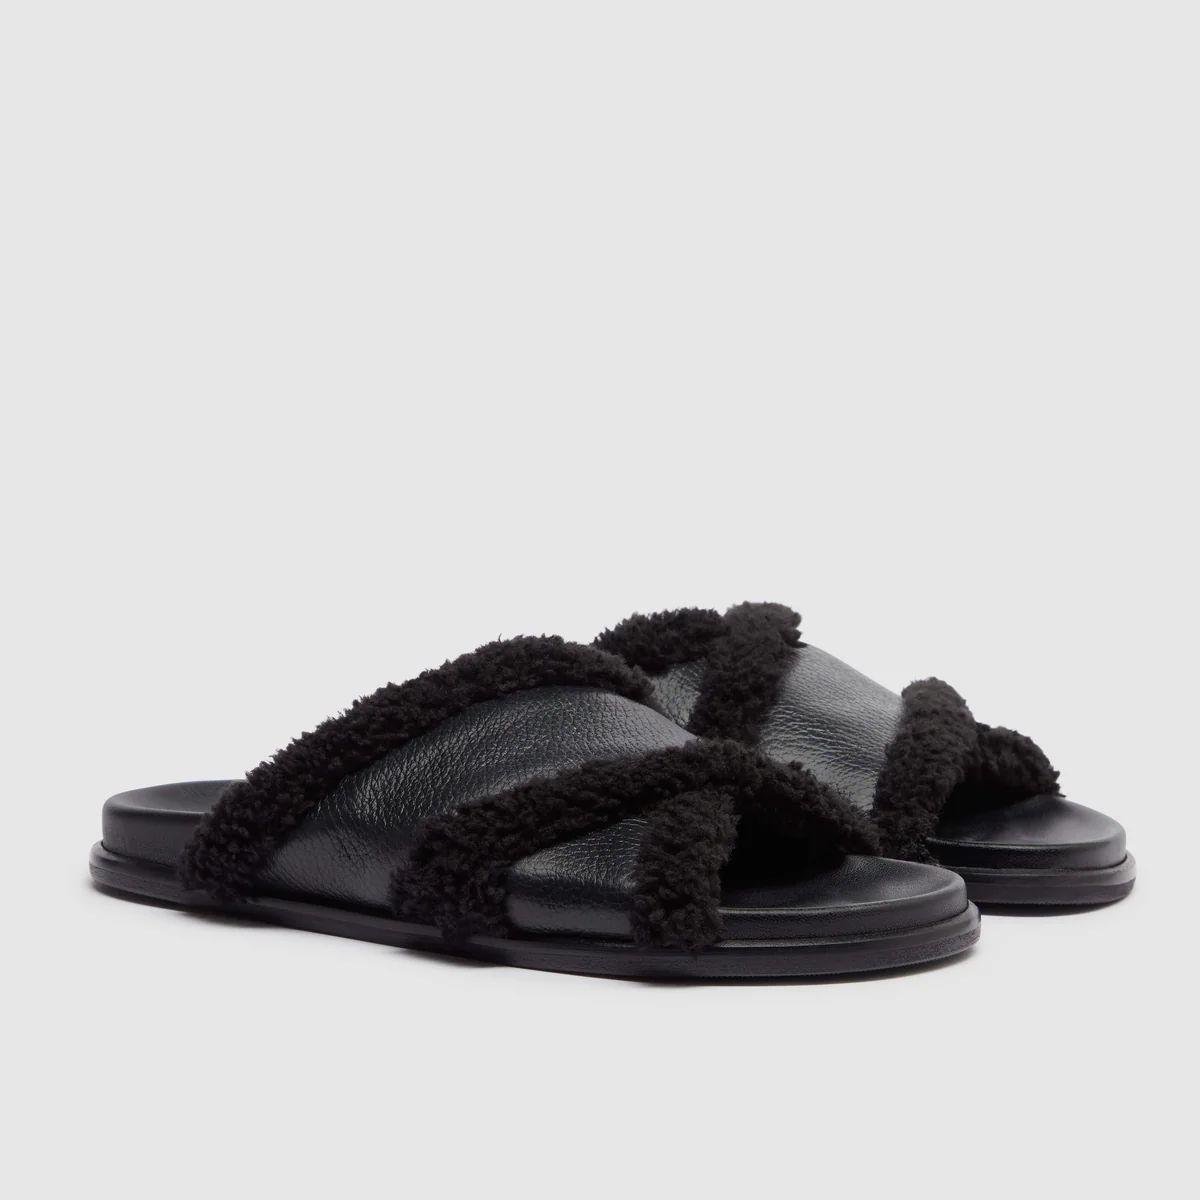 CROSSOVER LEATHER SLIDES - BLACK | WAT The Brand